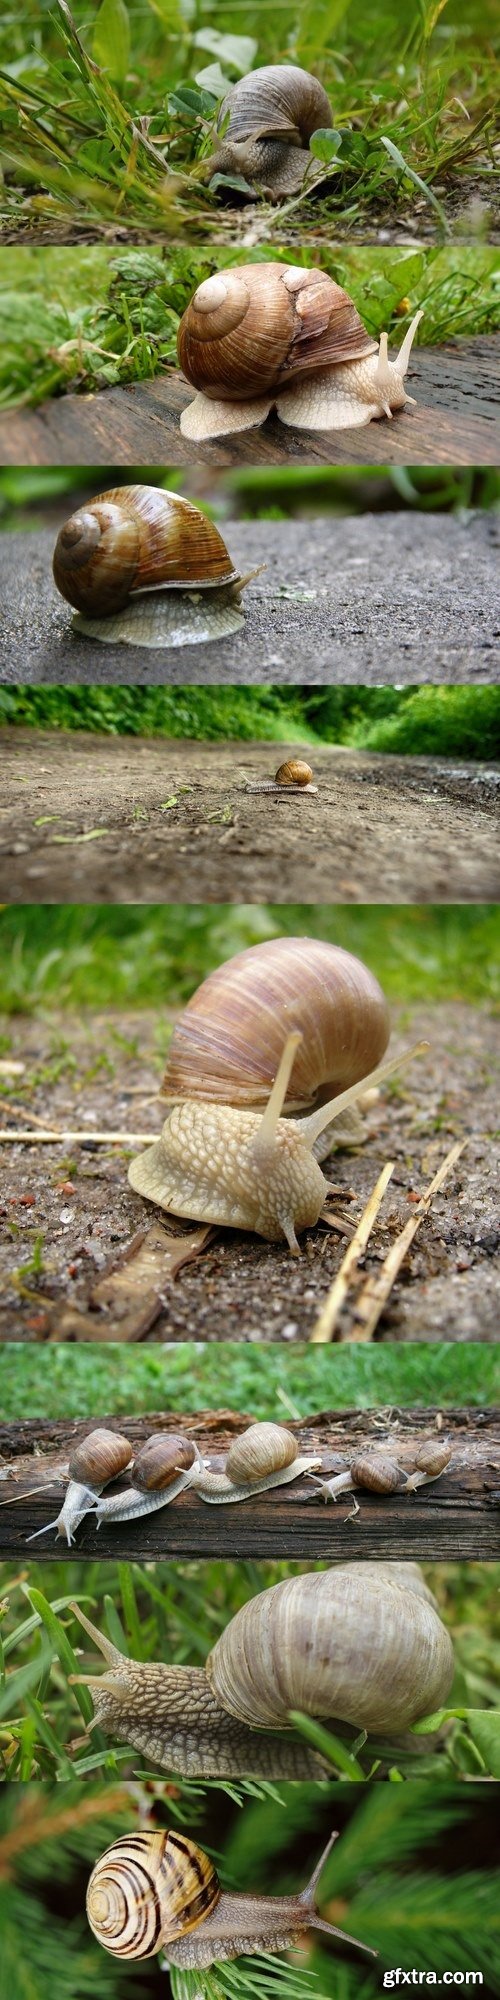 Snail Crawling in the Woods